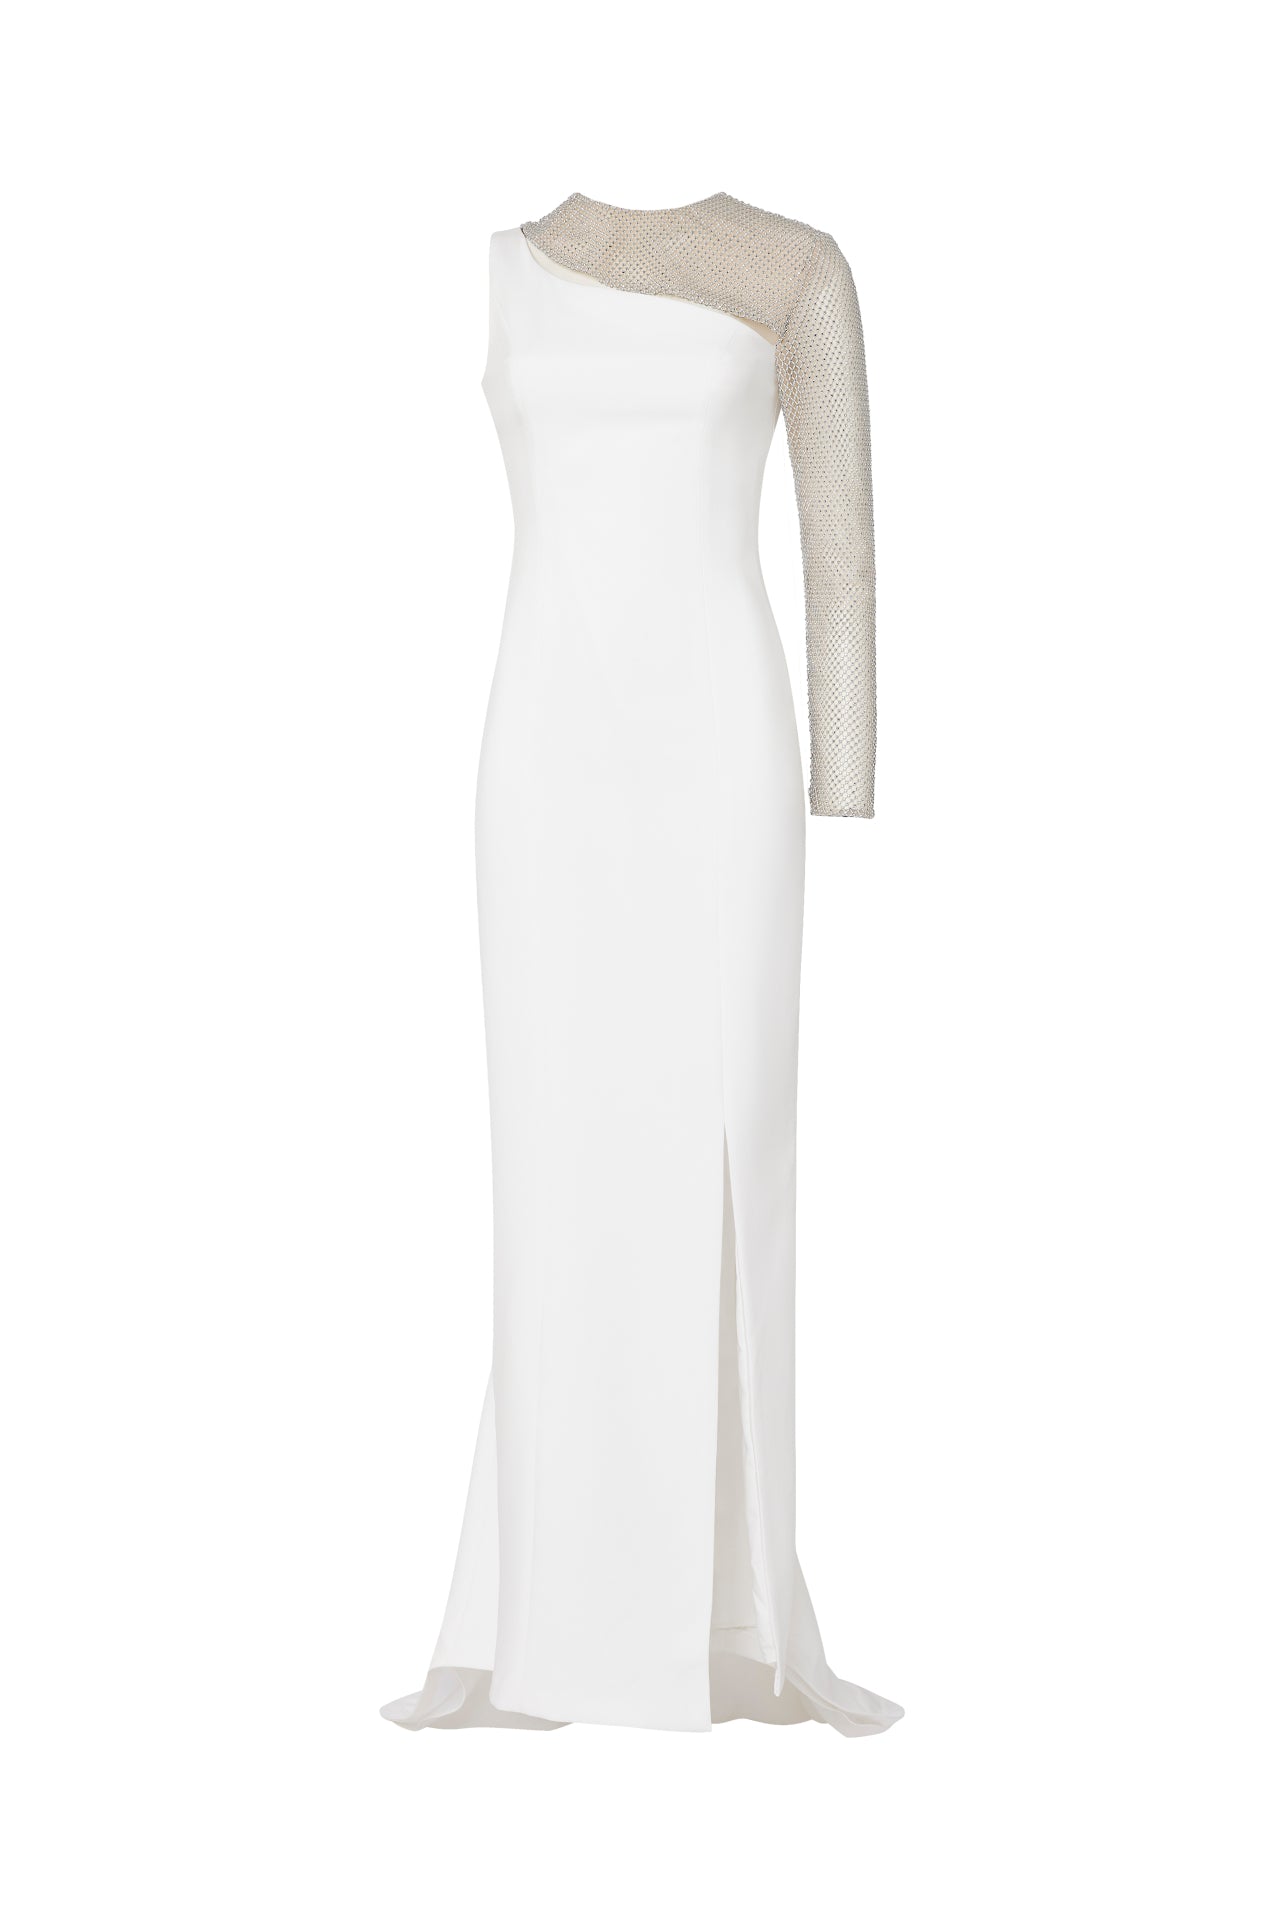 Crepe gown with single rhinestone sleeve and neck cut out